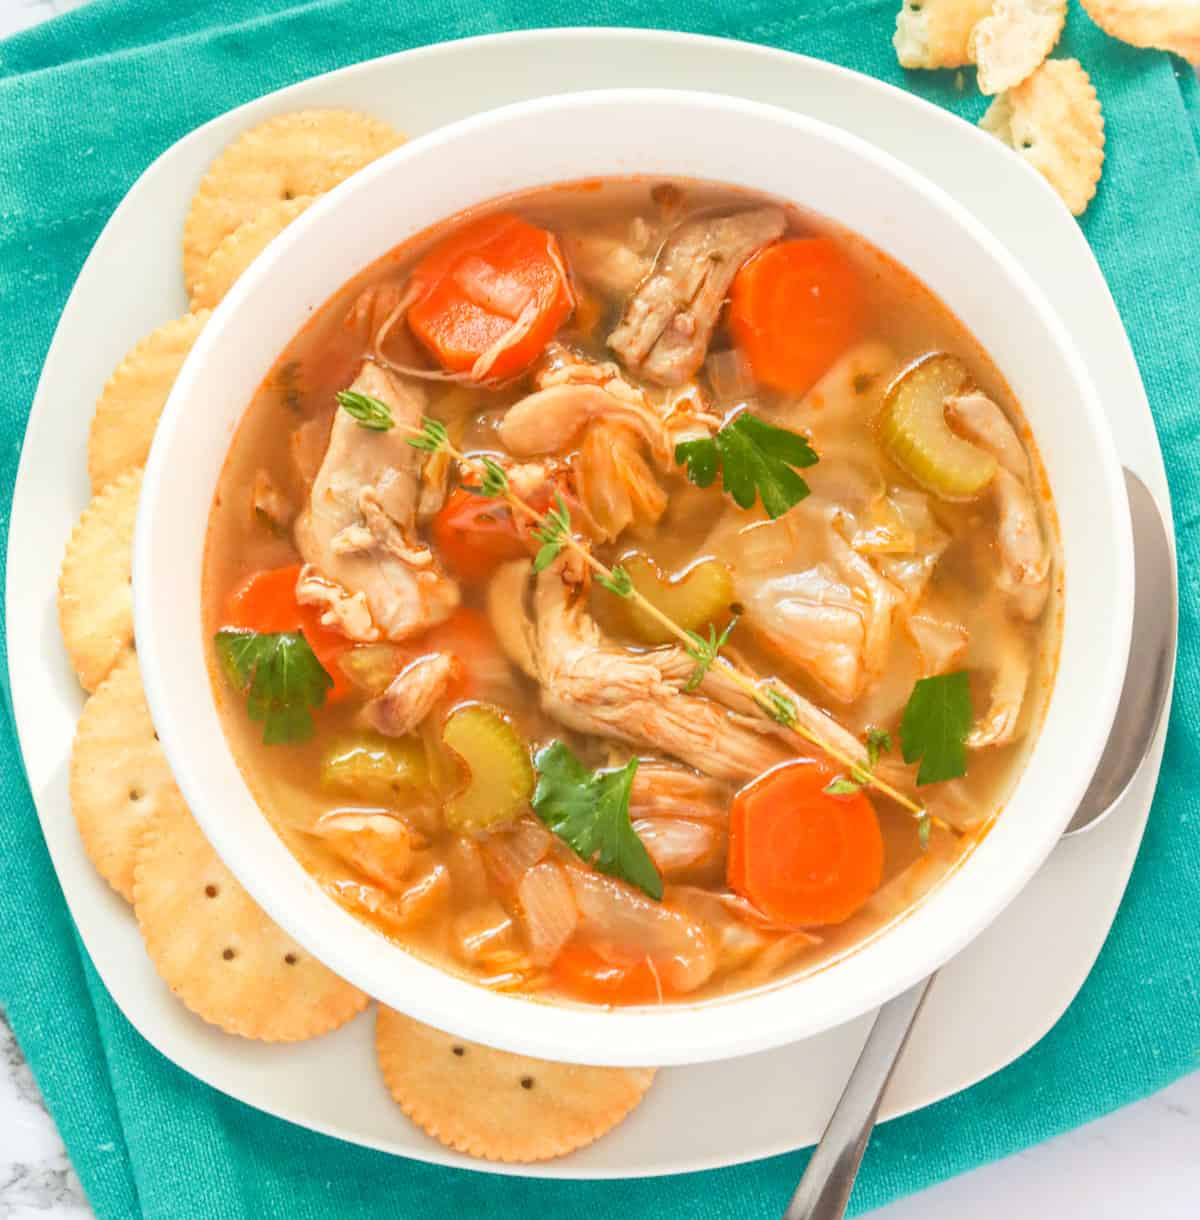 Chicken Cabbage Soup – A Still Satisfying Soup Makes Everyone's Comfort Food